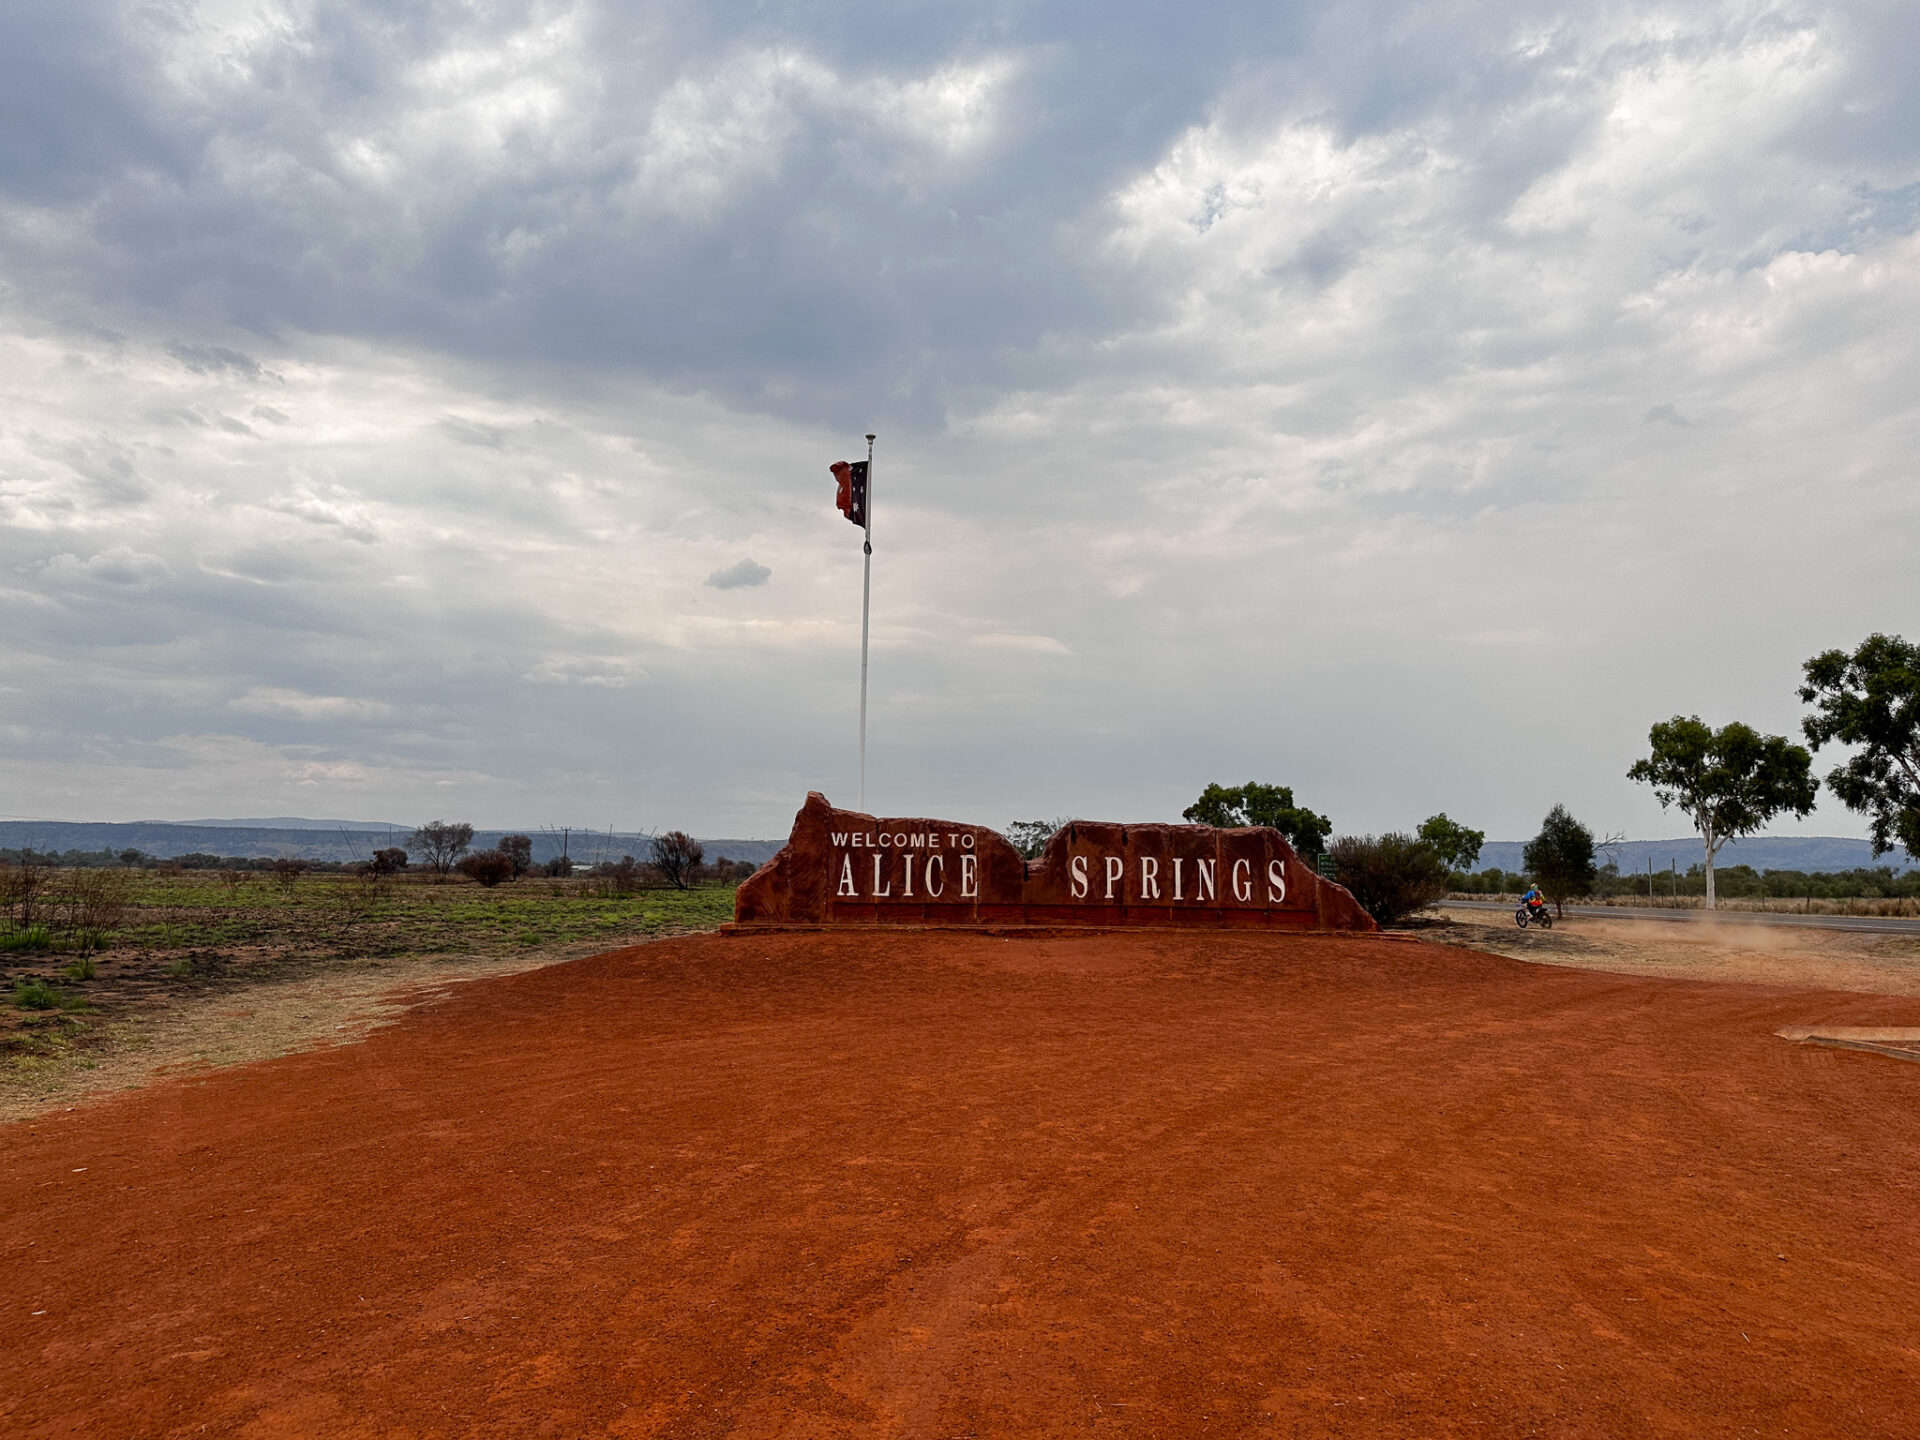 Text: 'Welcome to Alice Springs' is printed on a sign, in front of a flag pole. Red dirt fills the area in front of the sign, and some trees and grey sky is behind the sign.